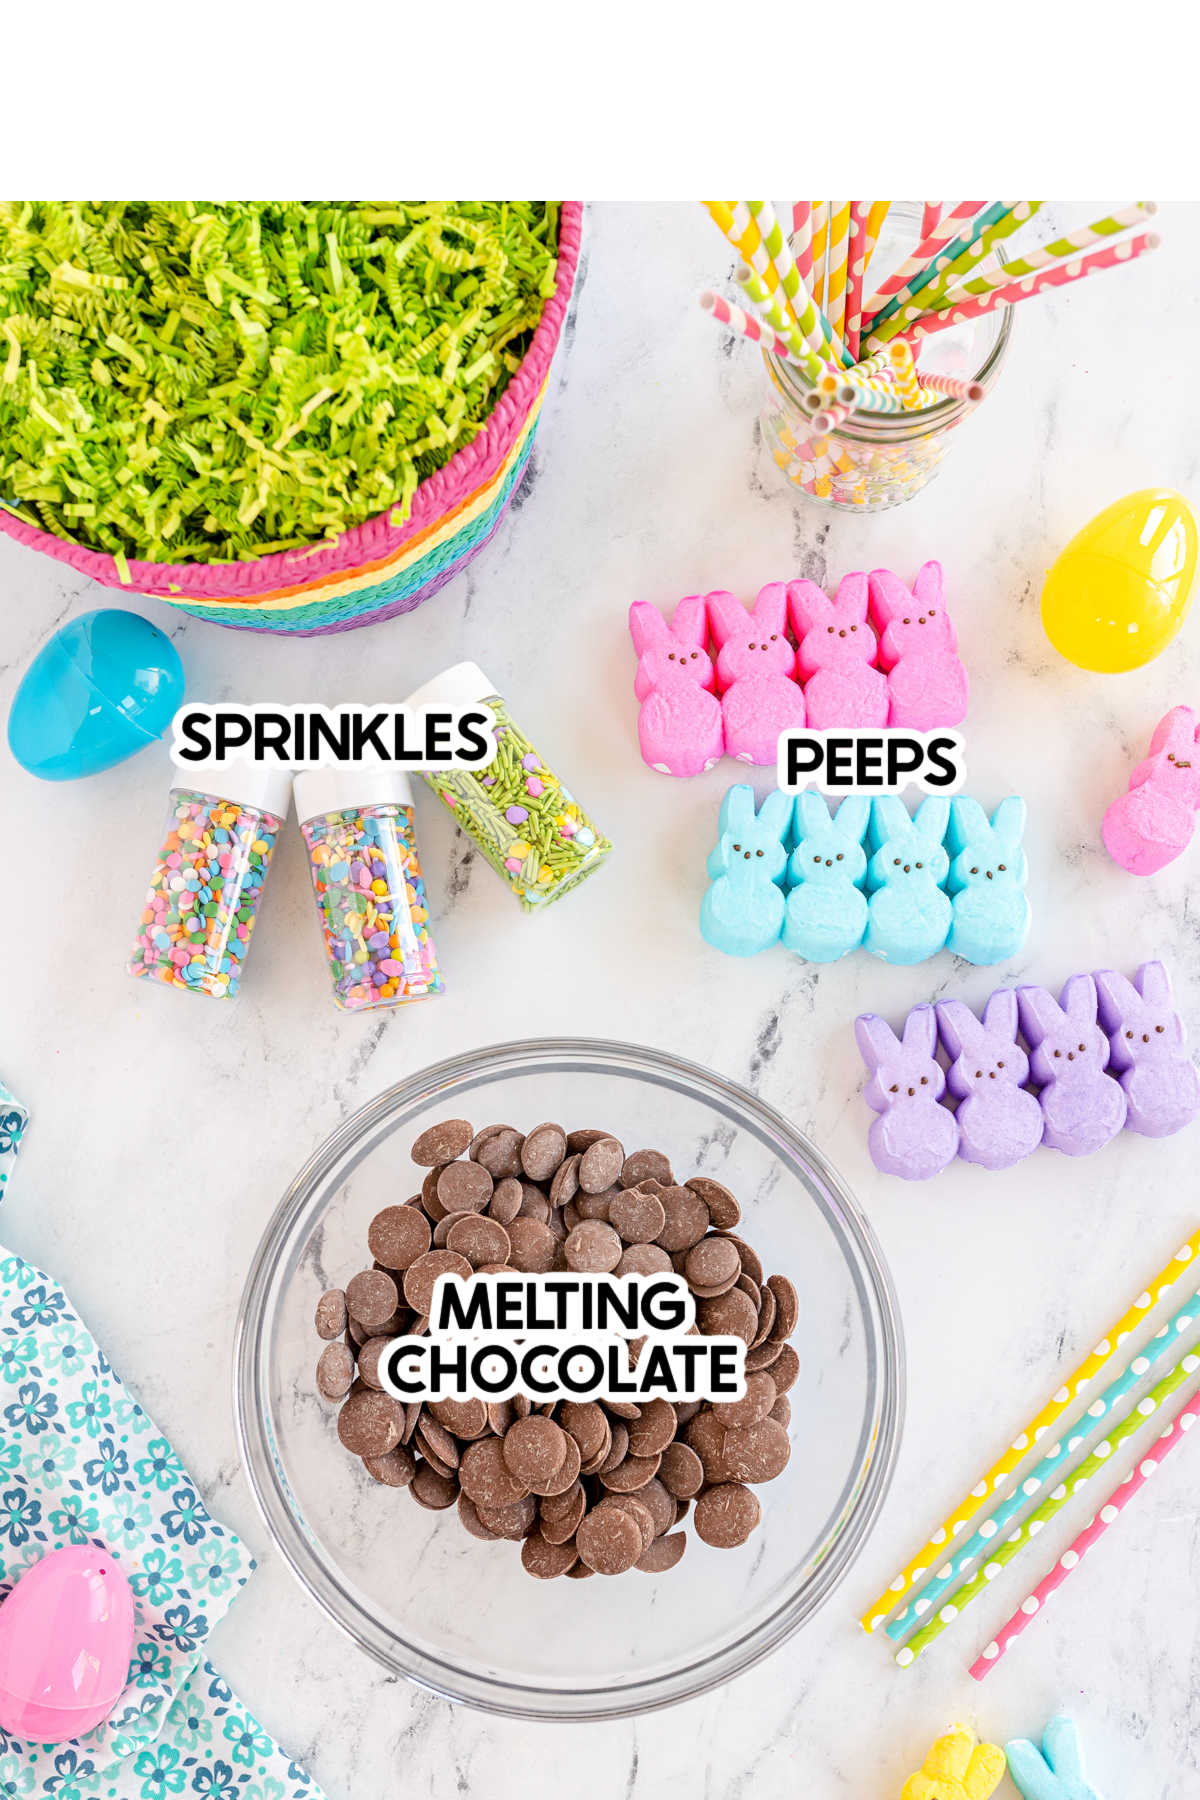 ingredients for chocolate covered peeps with labels